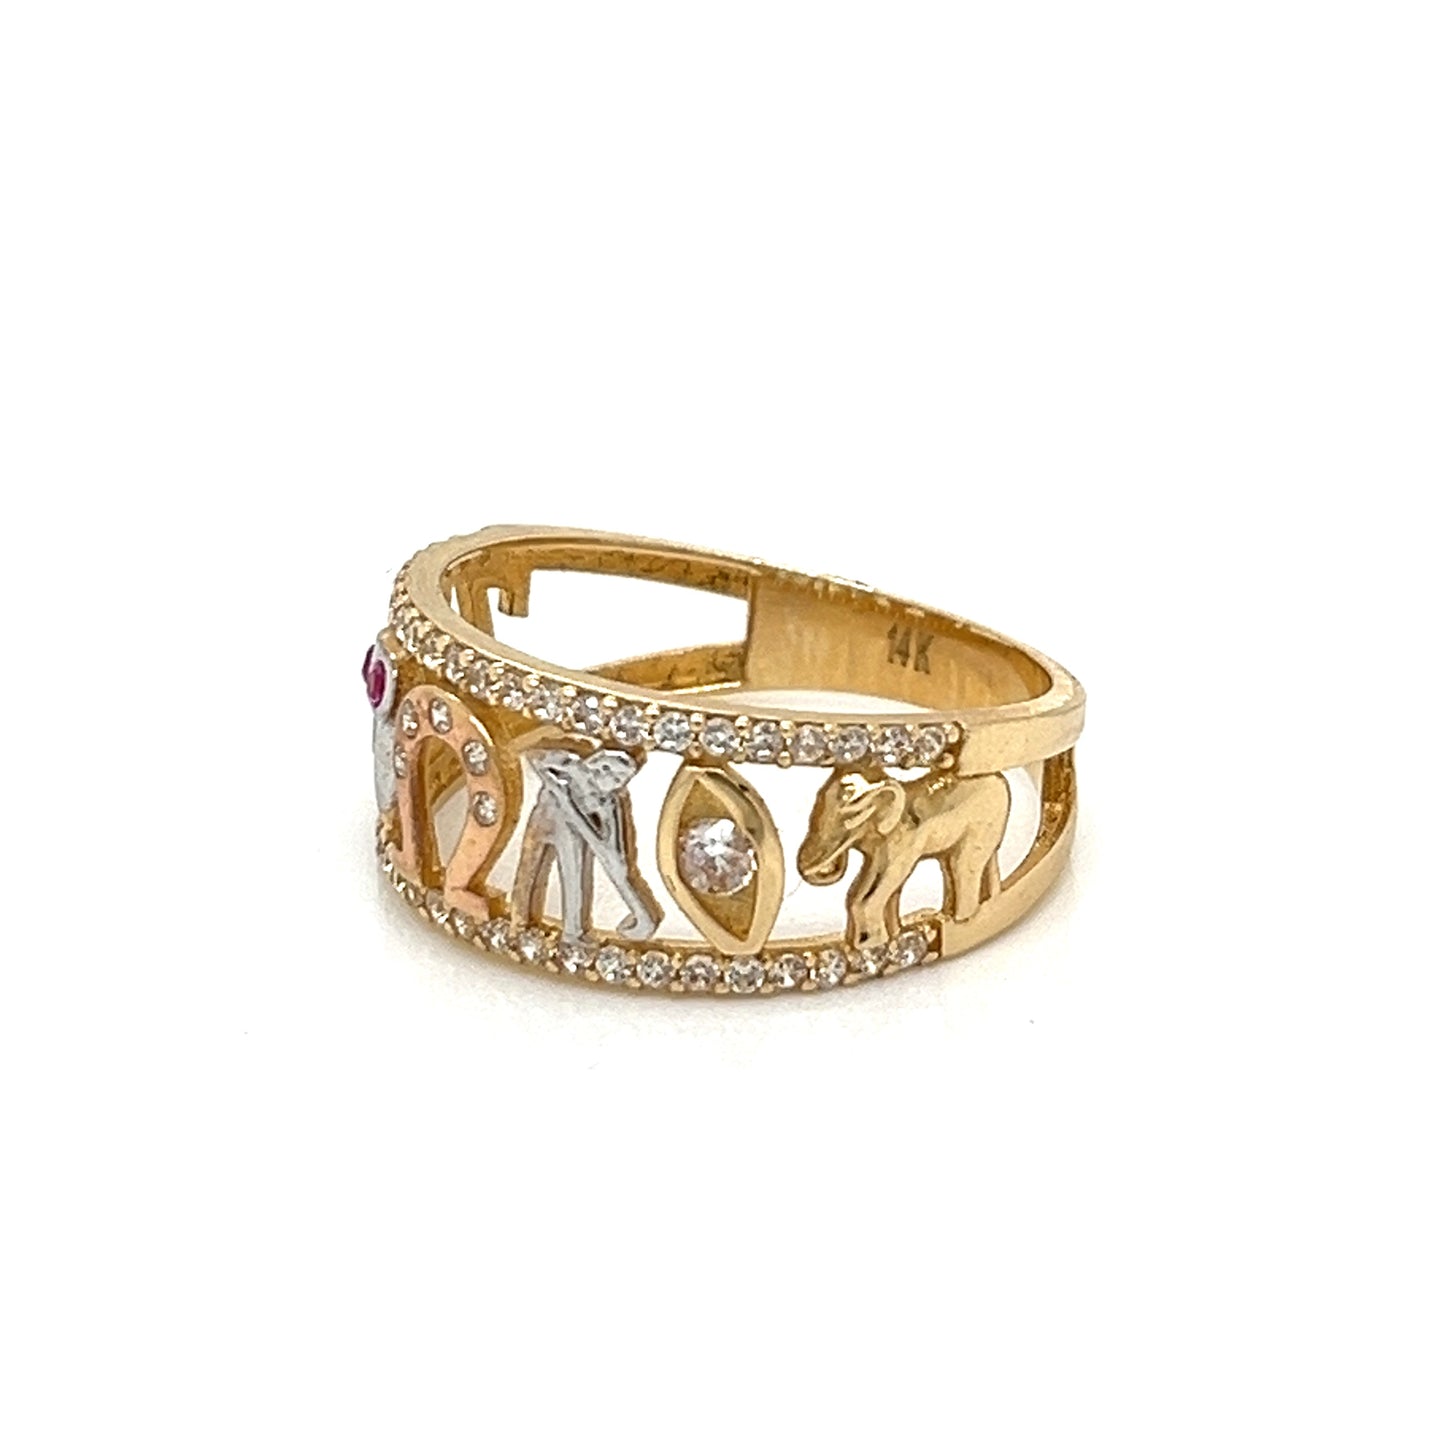 14K Gold "LUCKY" Ring W/ CZ